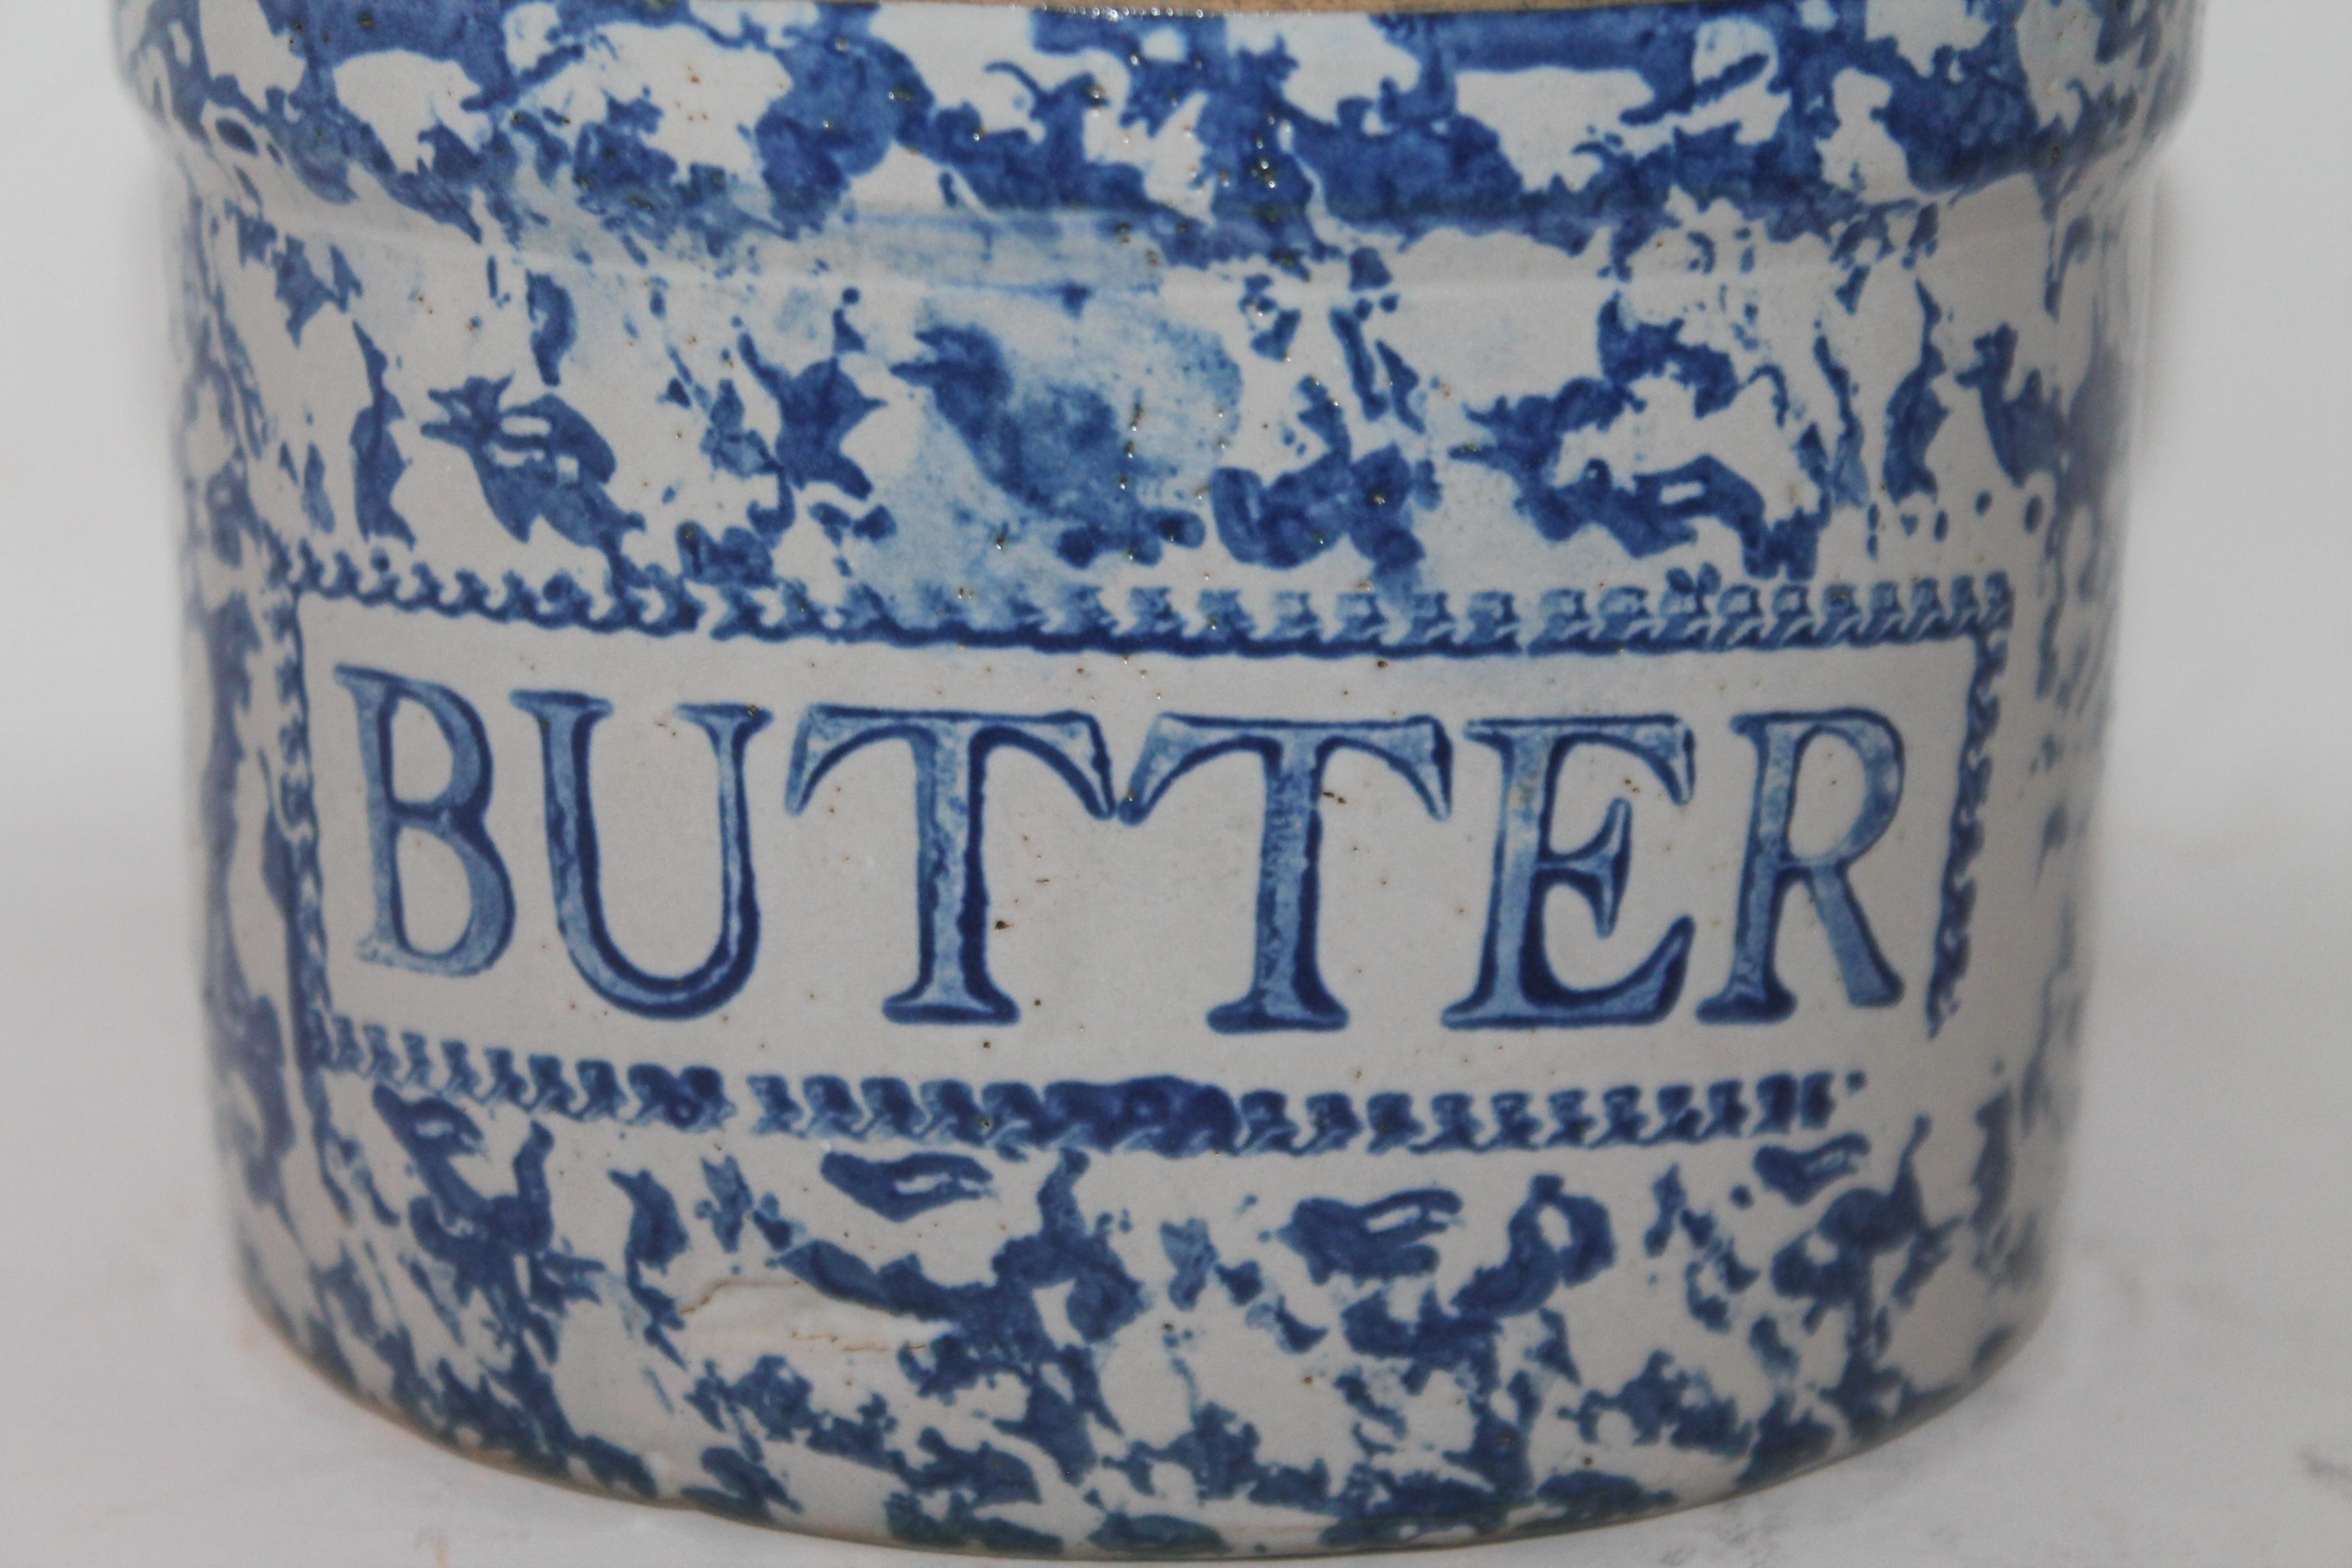 19th century sponge ware butter crock in very good condition.